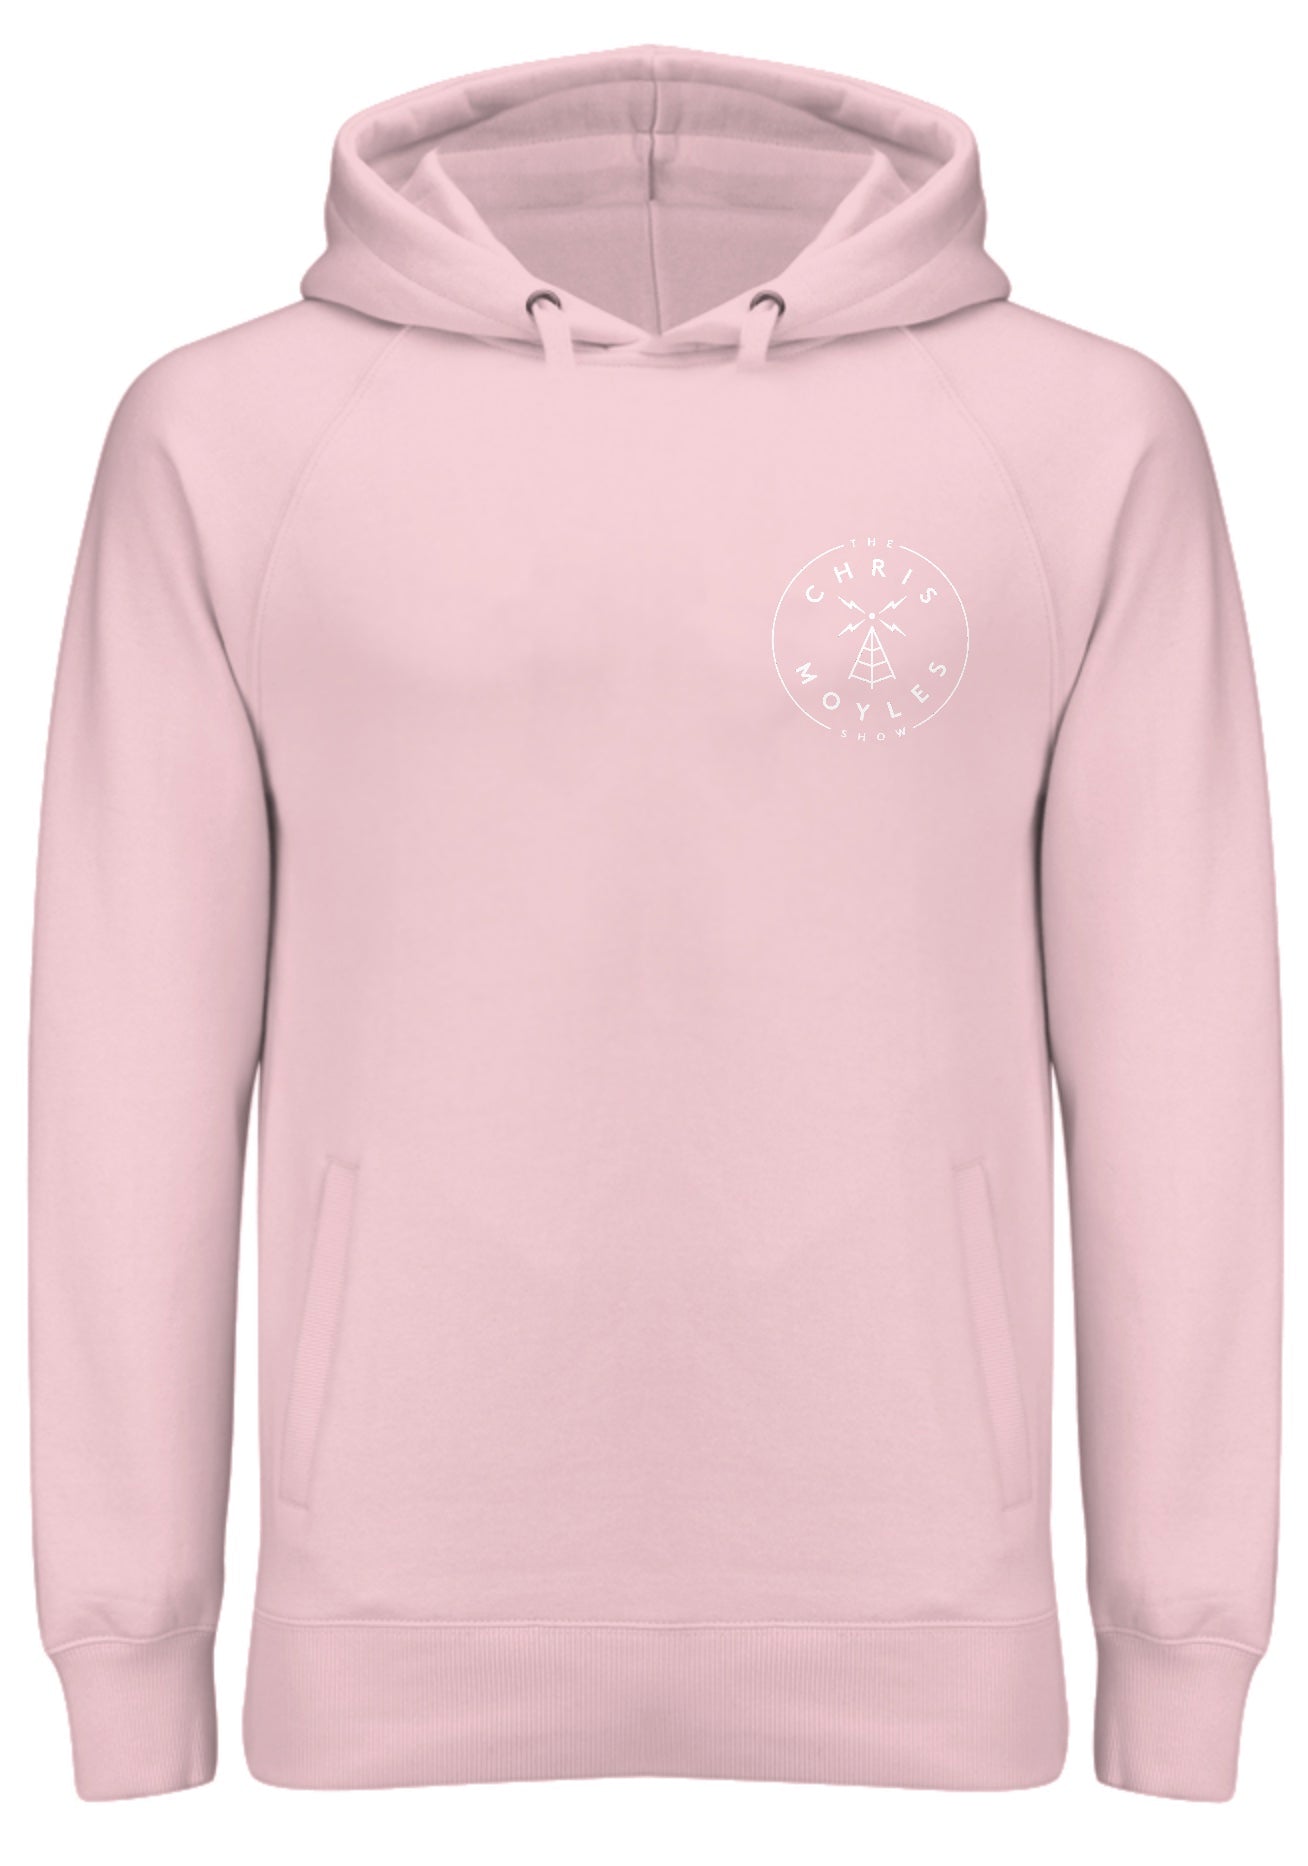 'The Chris Moyles Show' Small Print Hoodie - 'Pink'